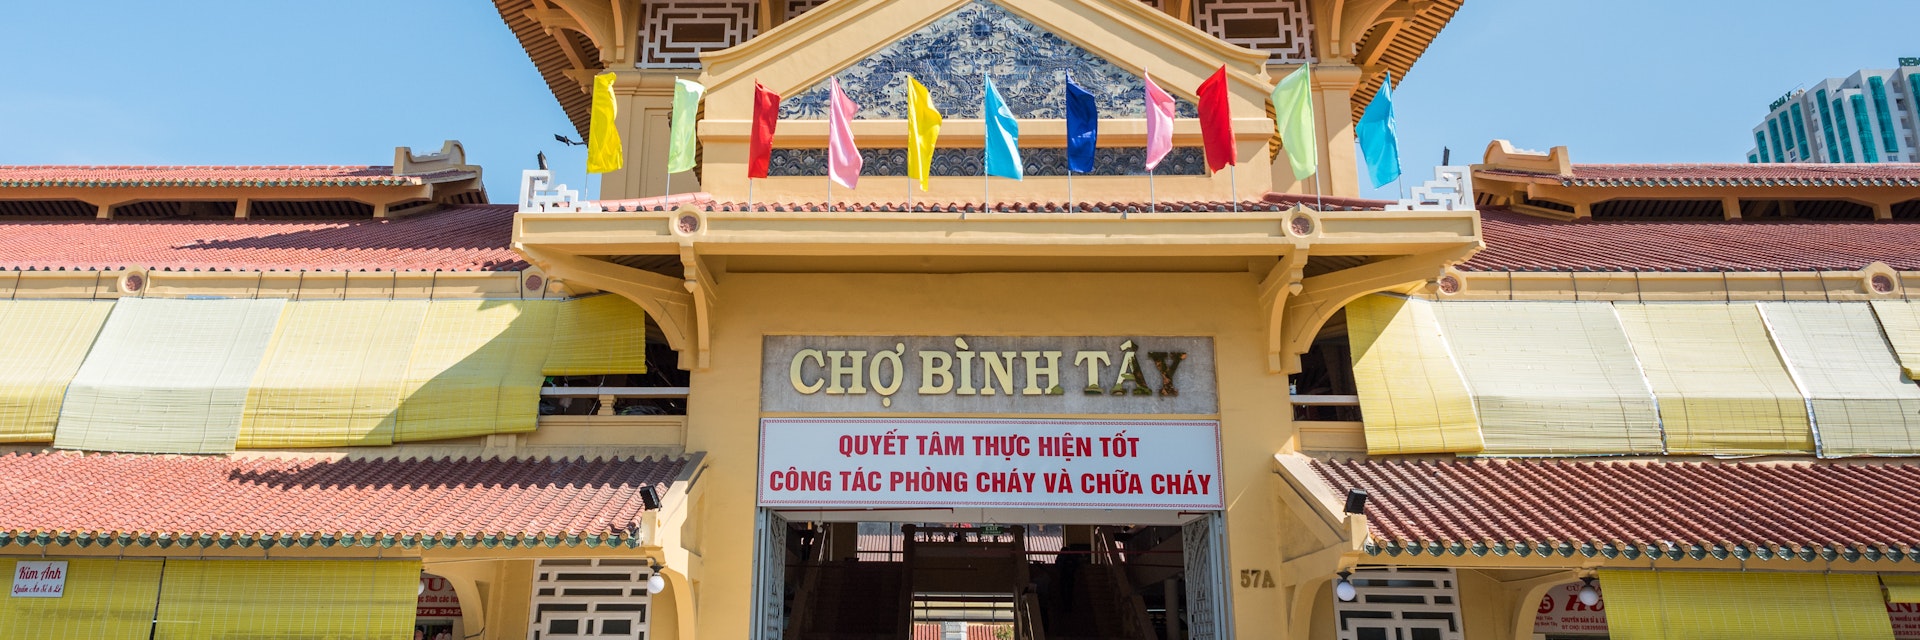 Ho Chi Minh City, Vietnam - April 15, 2019: the exterior of the central entrance and the tower of Cho Binh Tay market in Cho Lon (Cholon), a Chinatown.
1148759159